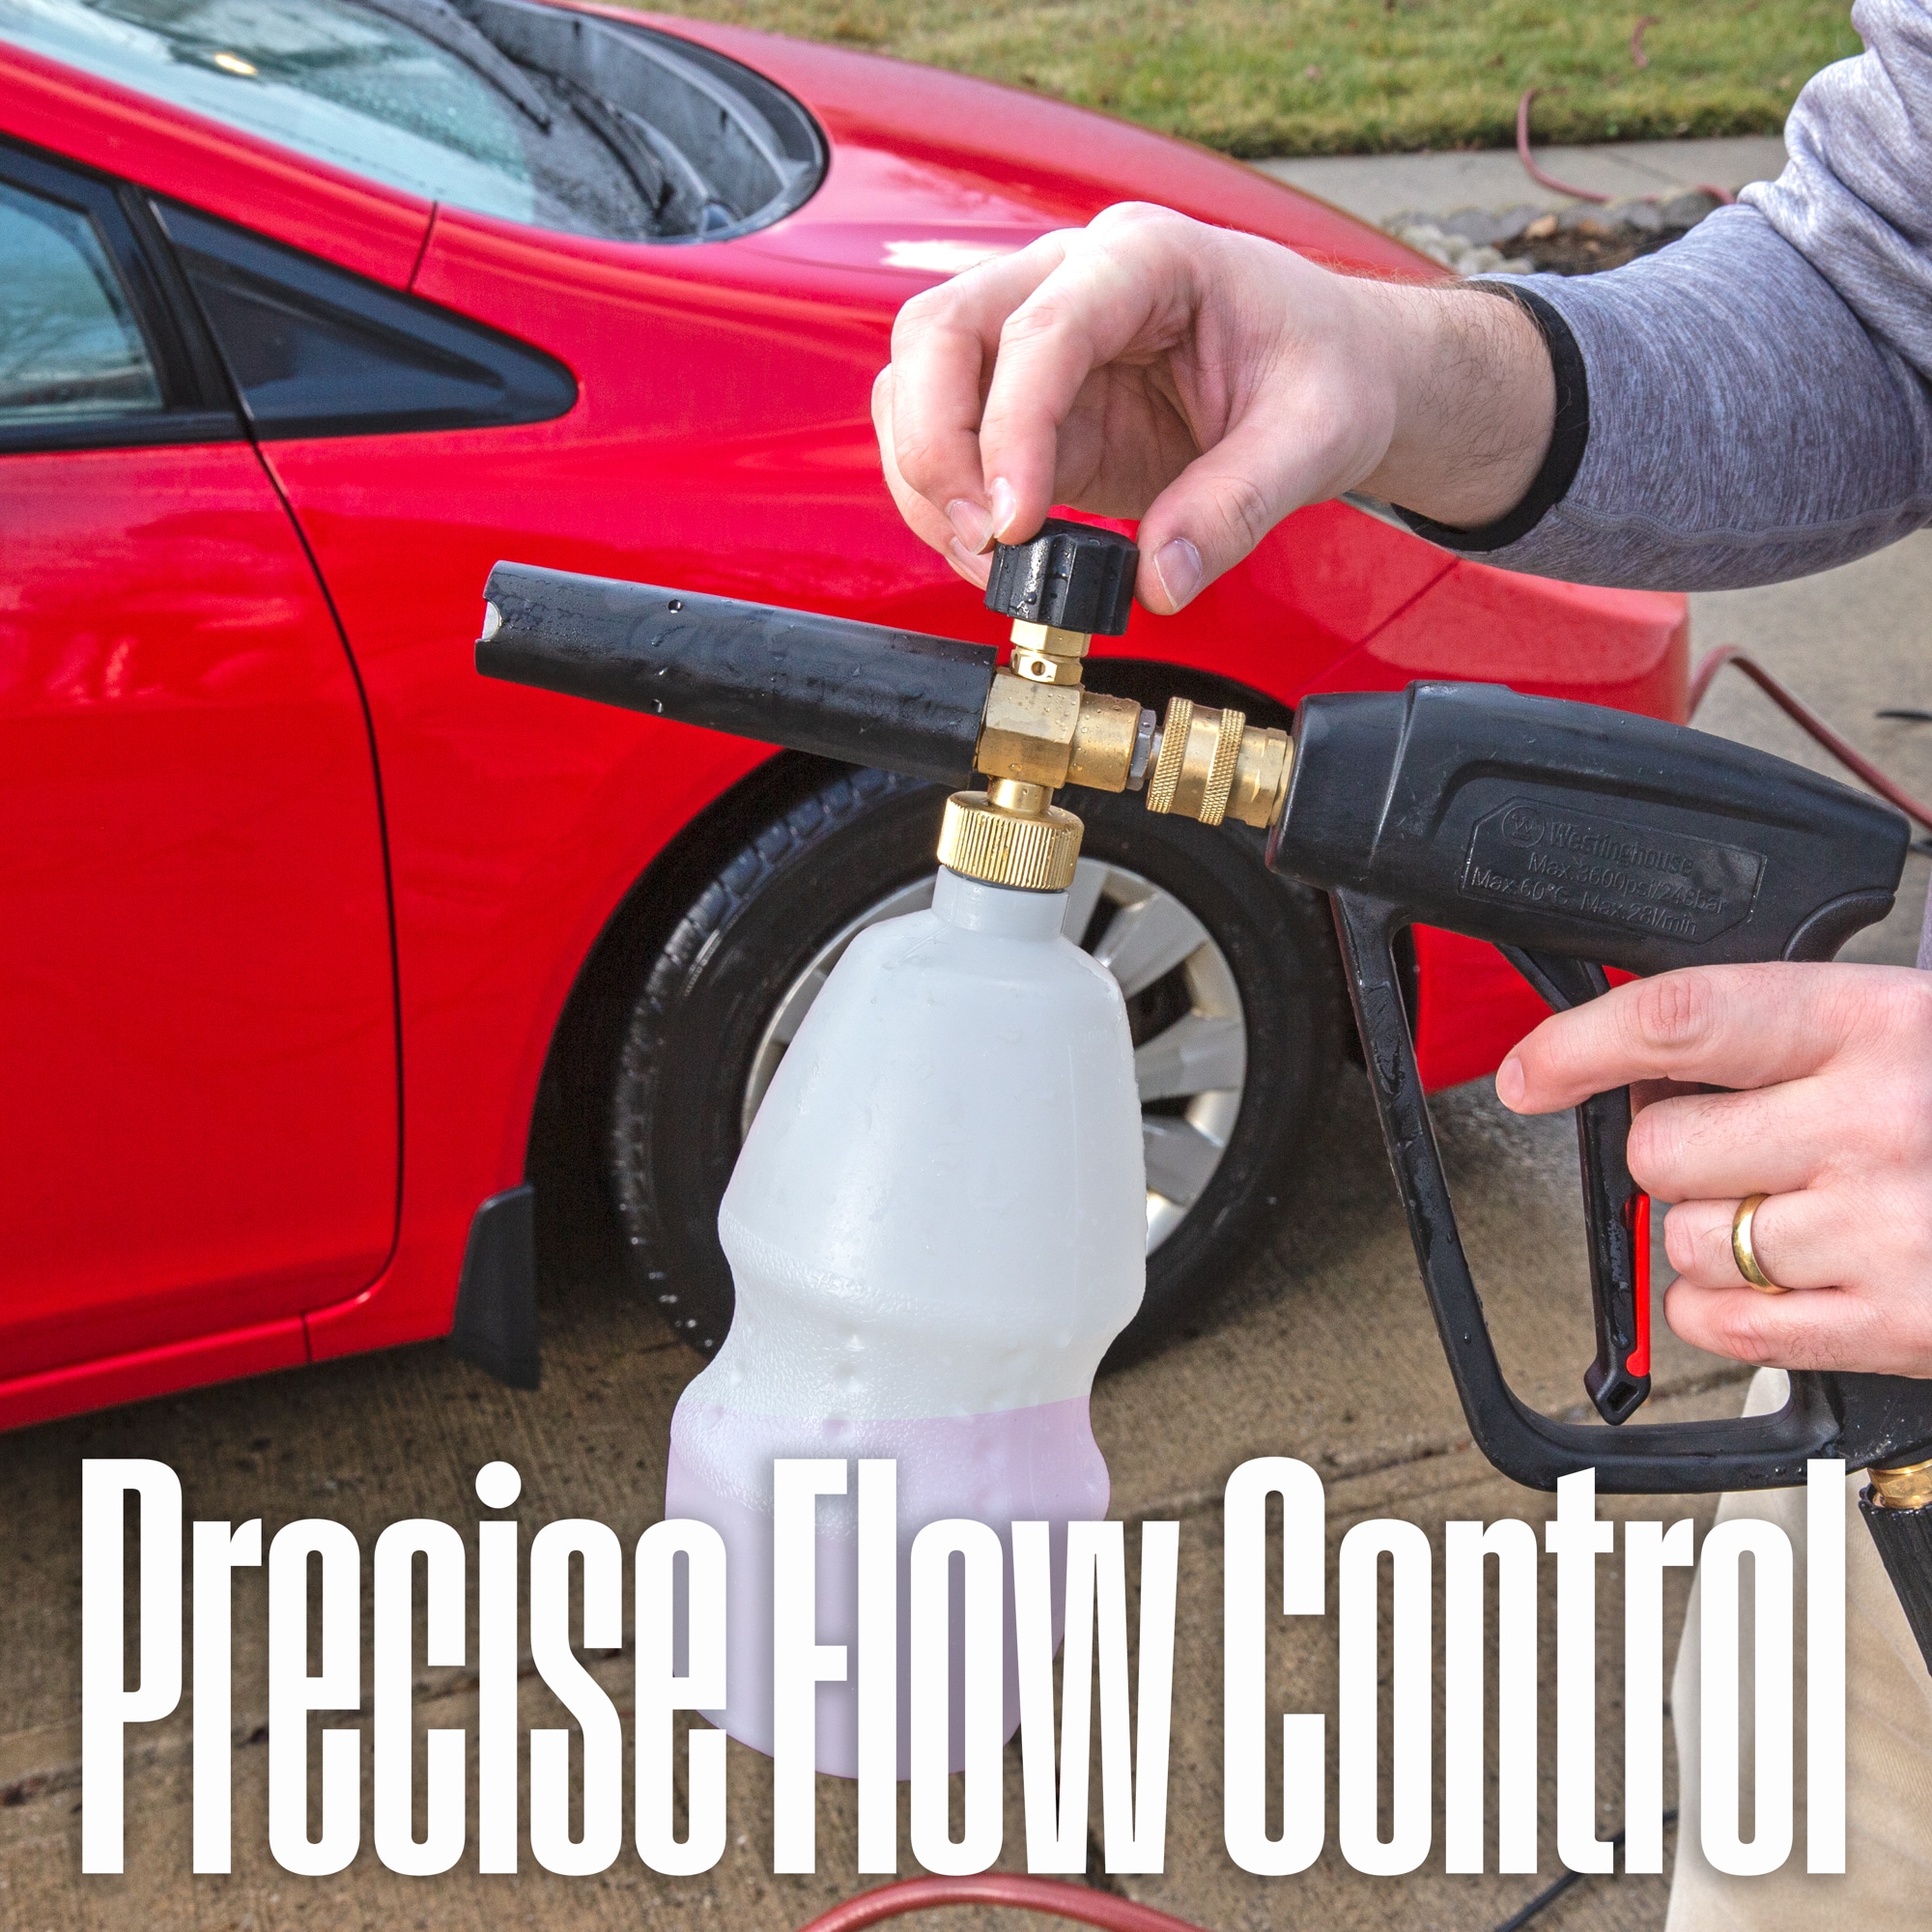 Detail King Garden Hose Foam Gun - Apply Foaming Car Soap Without The Need  for a Pressure Washer!